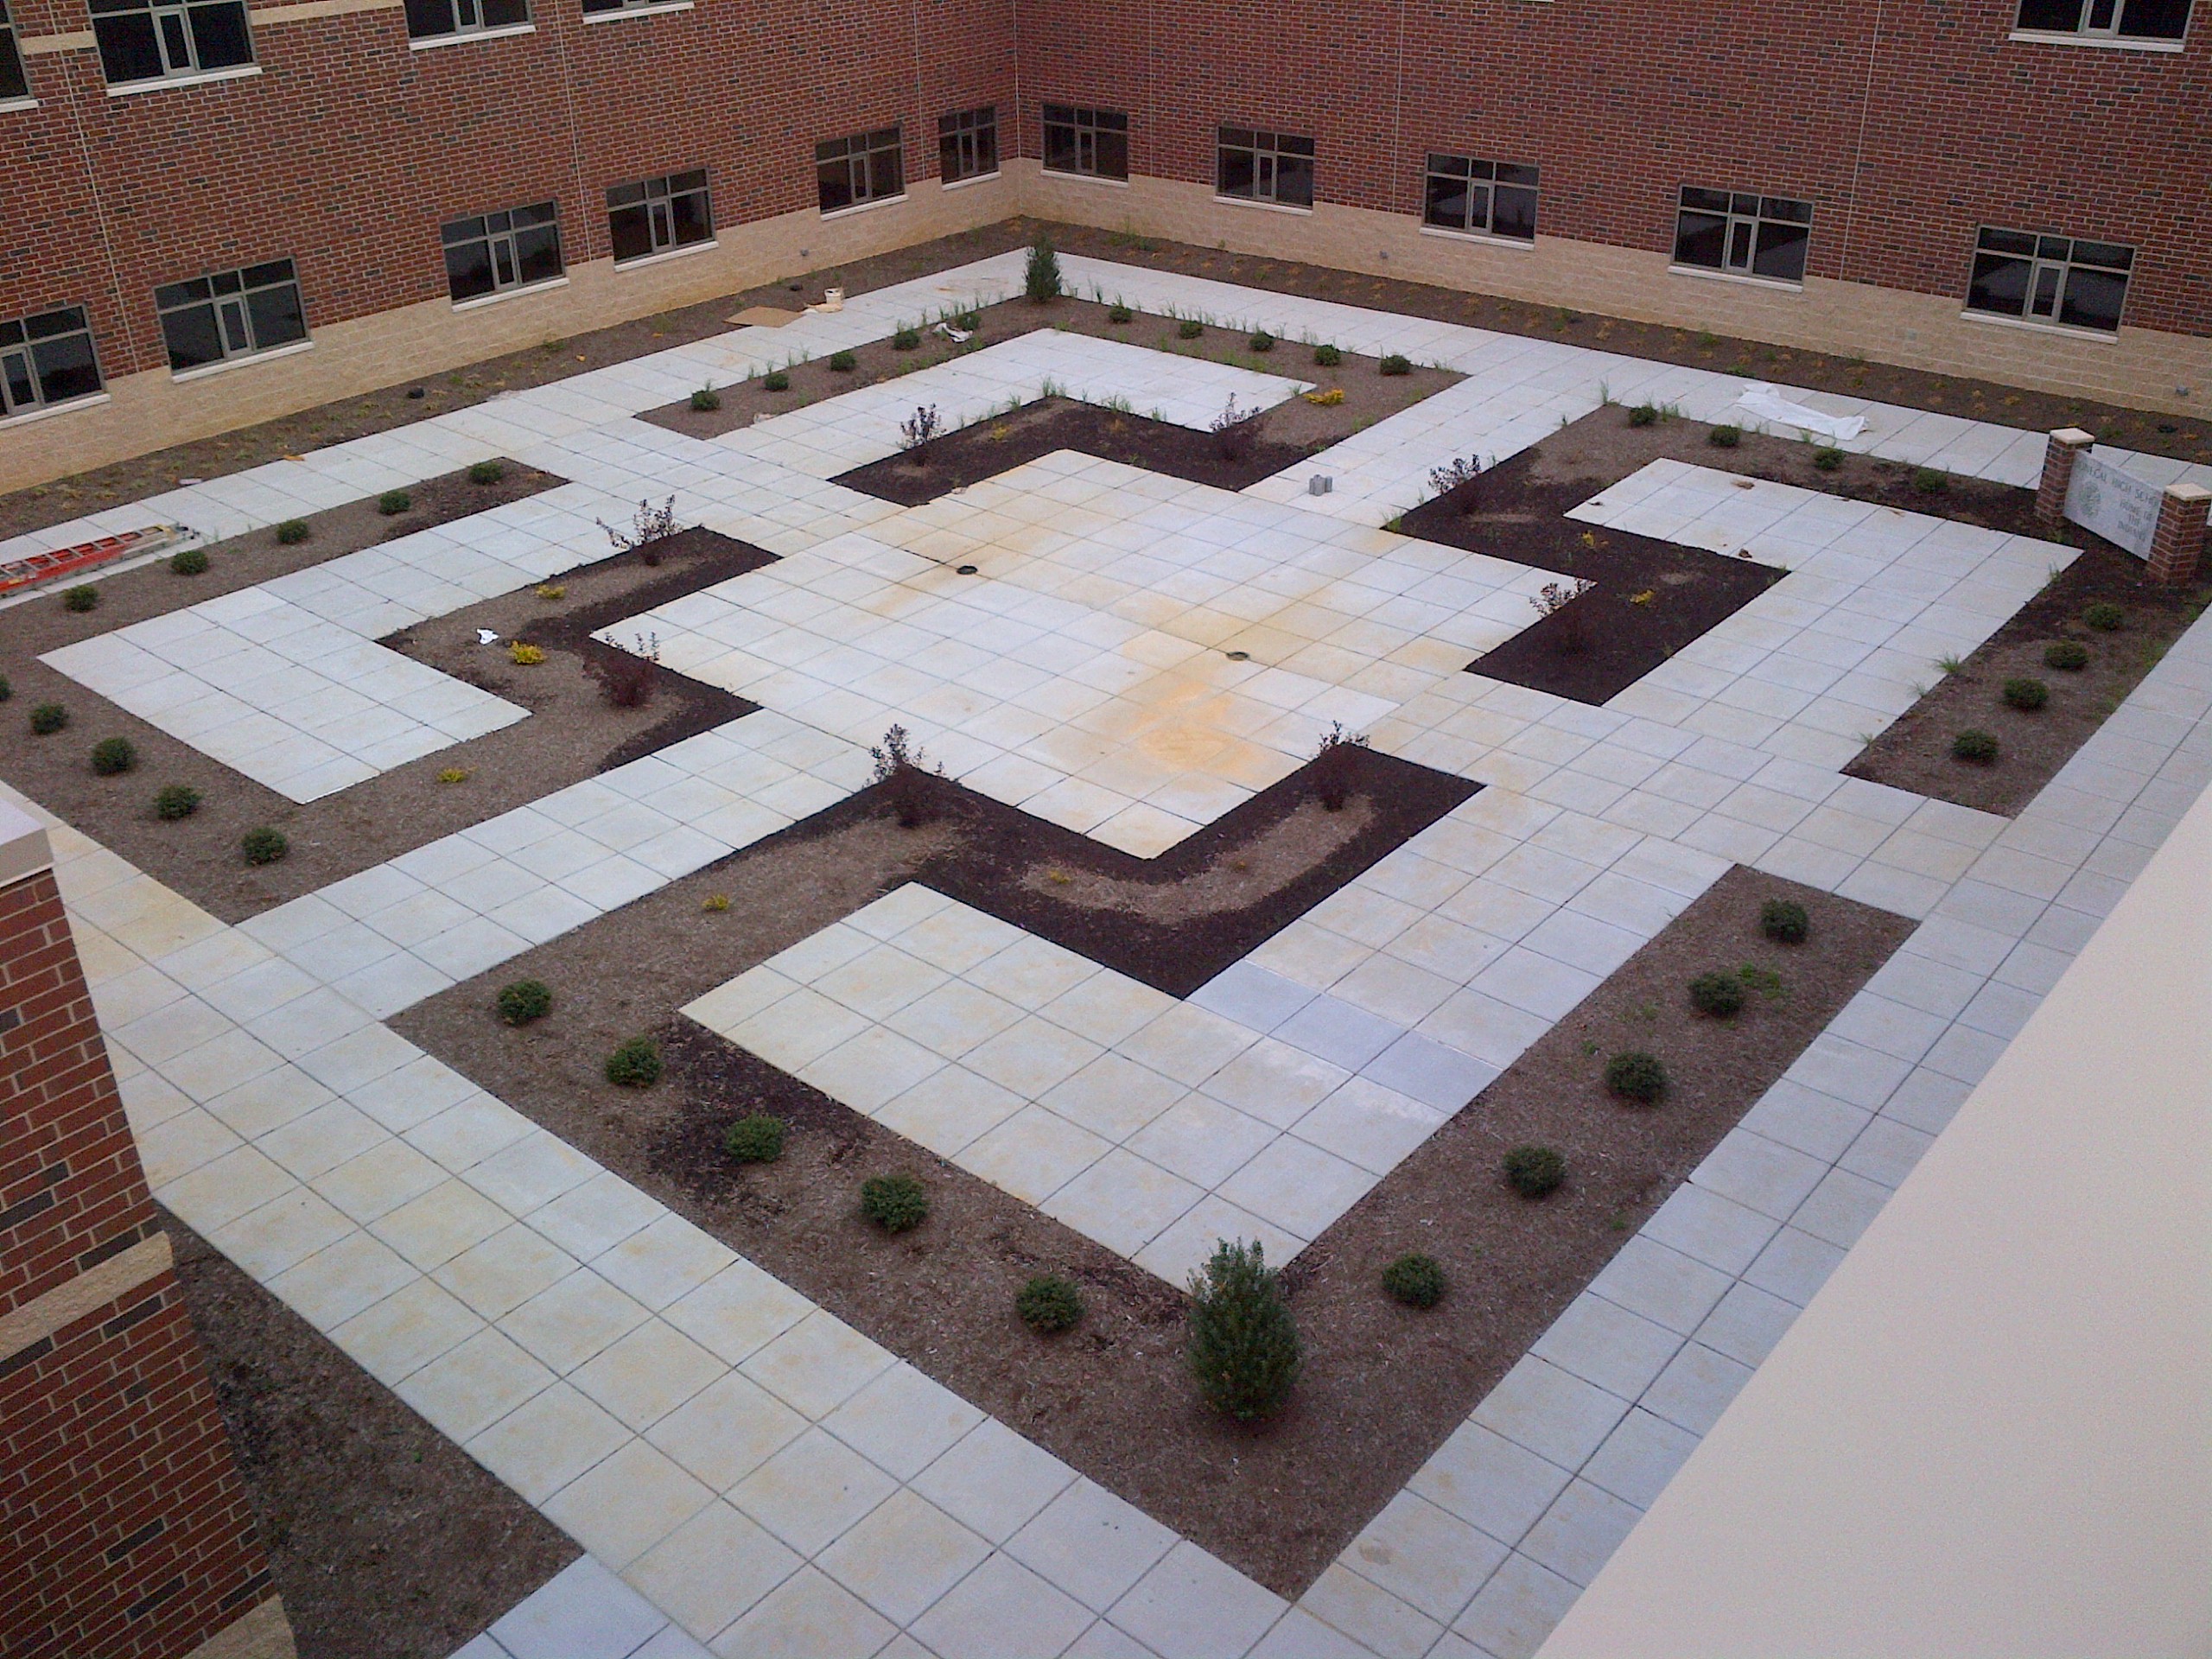 New Donegal High School Concrete Sidewalks and Courtyard Carbaugh